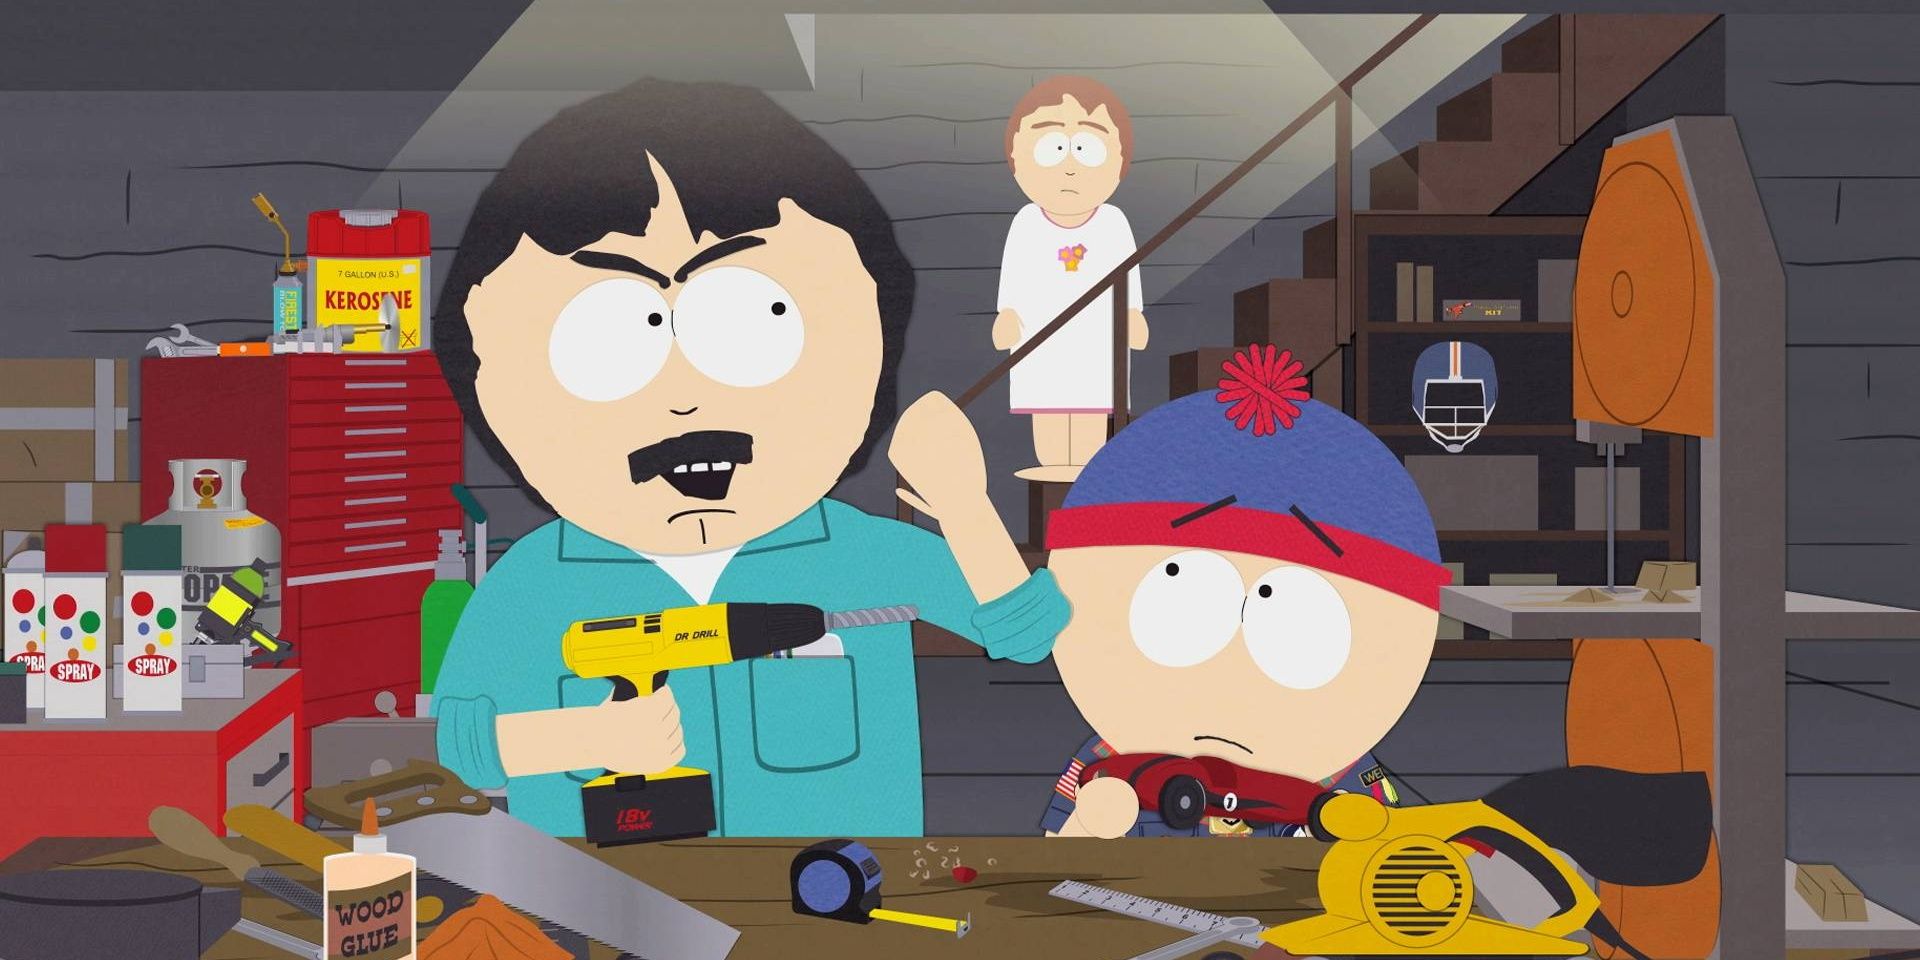 Randy in Pinewood Derby, a South Park episode